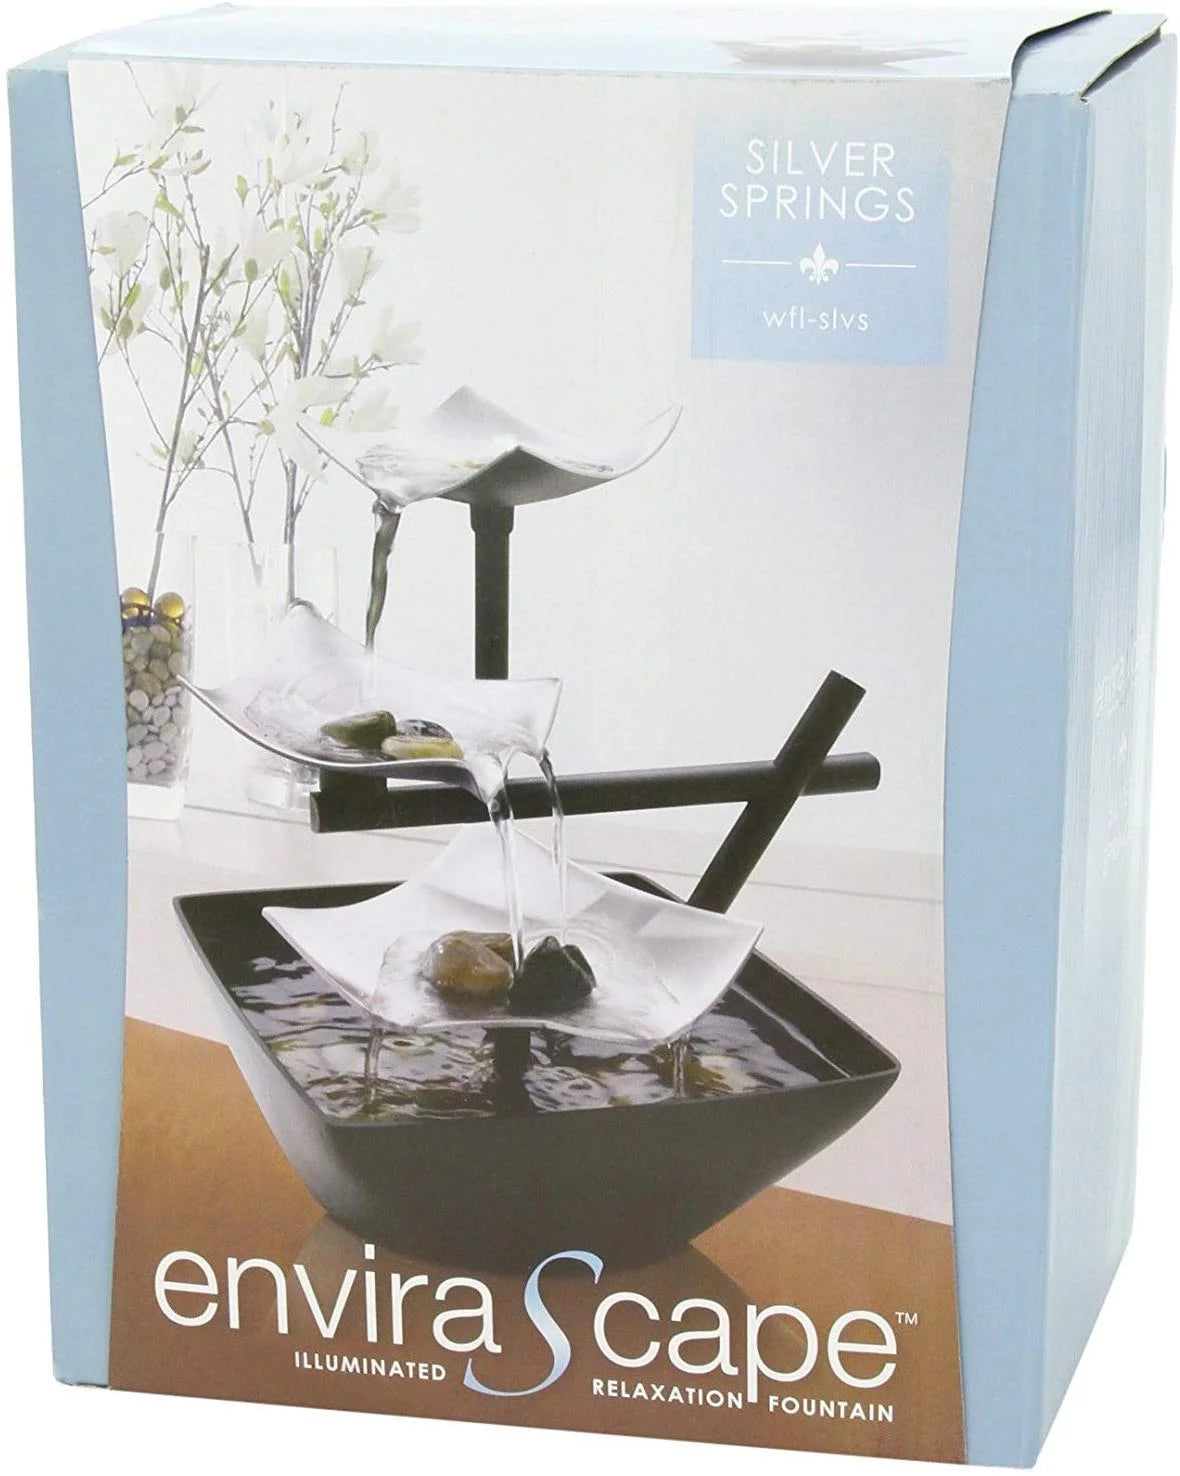 Envirascape Silver Springs Indoor Water Fountain, with Natural River Rocks, Soothing Nature Sounds, Zen Relaxation - Design By Technique